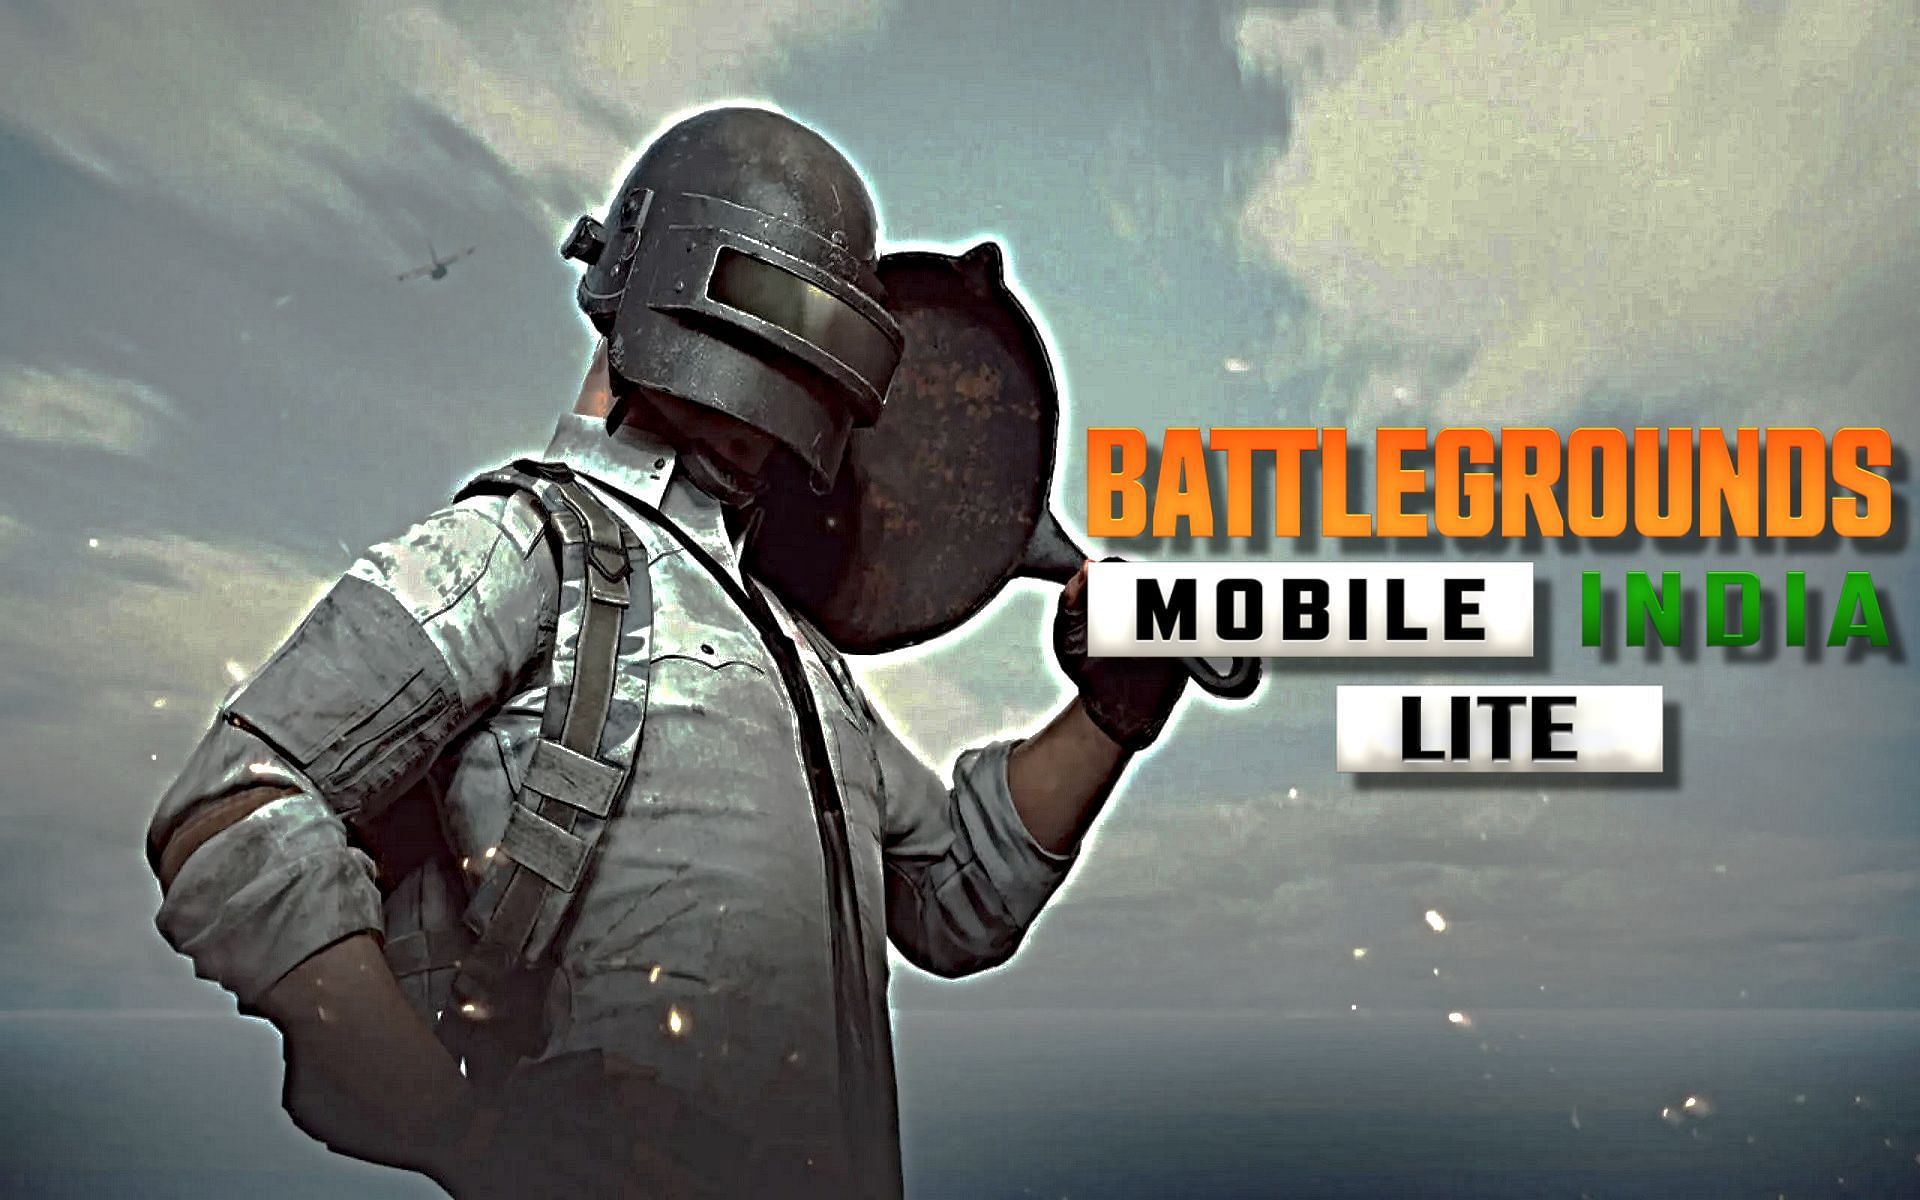 Players have been asking for Battlegrounds Mobile India Lite for months (Image via Sportskeeda)